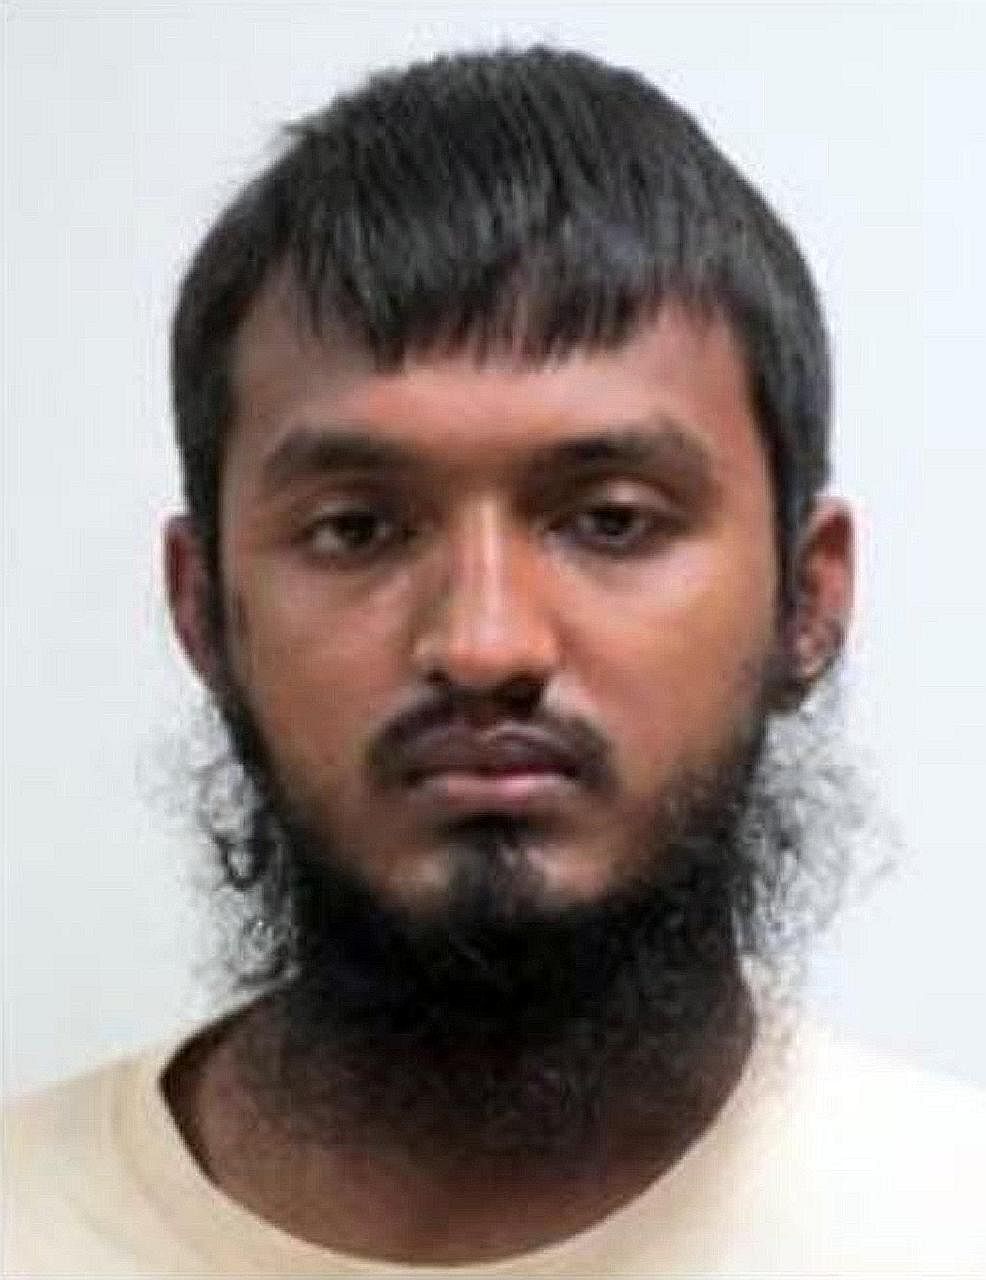 Ahmed Faysal intended to carry out attacks in Bangladesh, said the Ministry of Home Affairs.